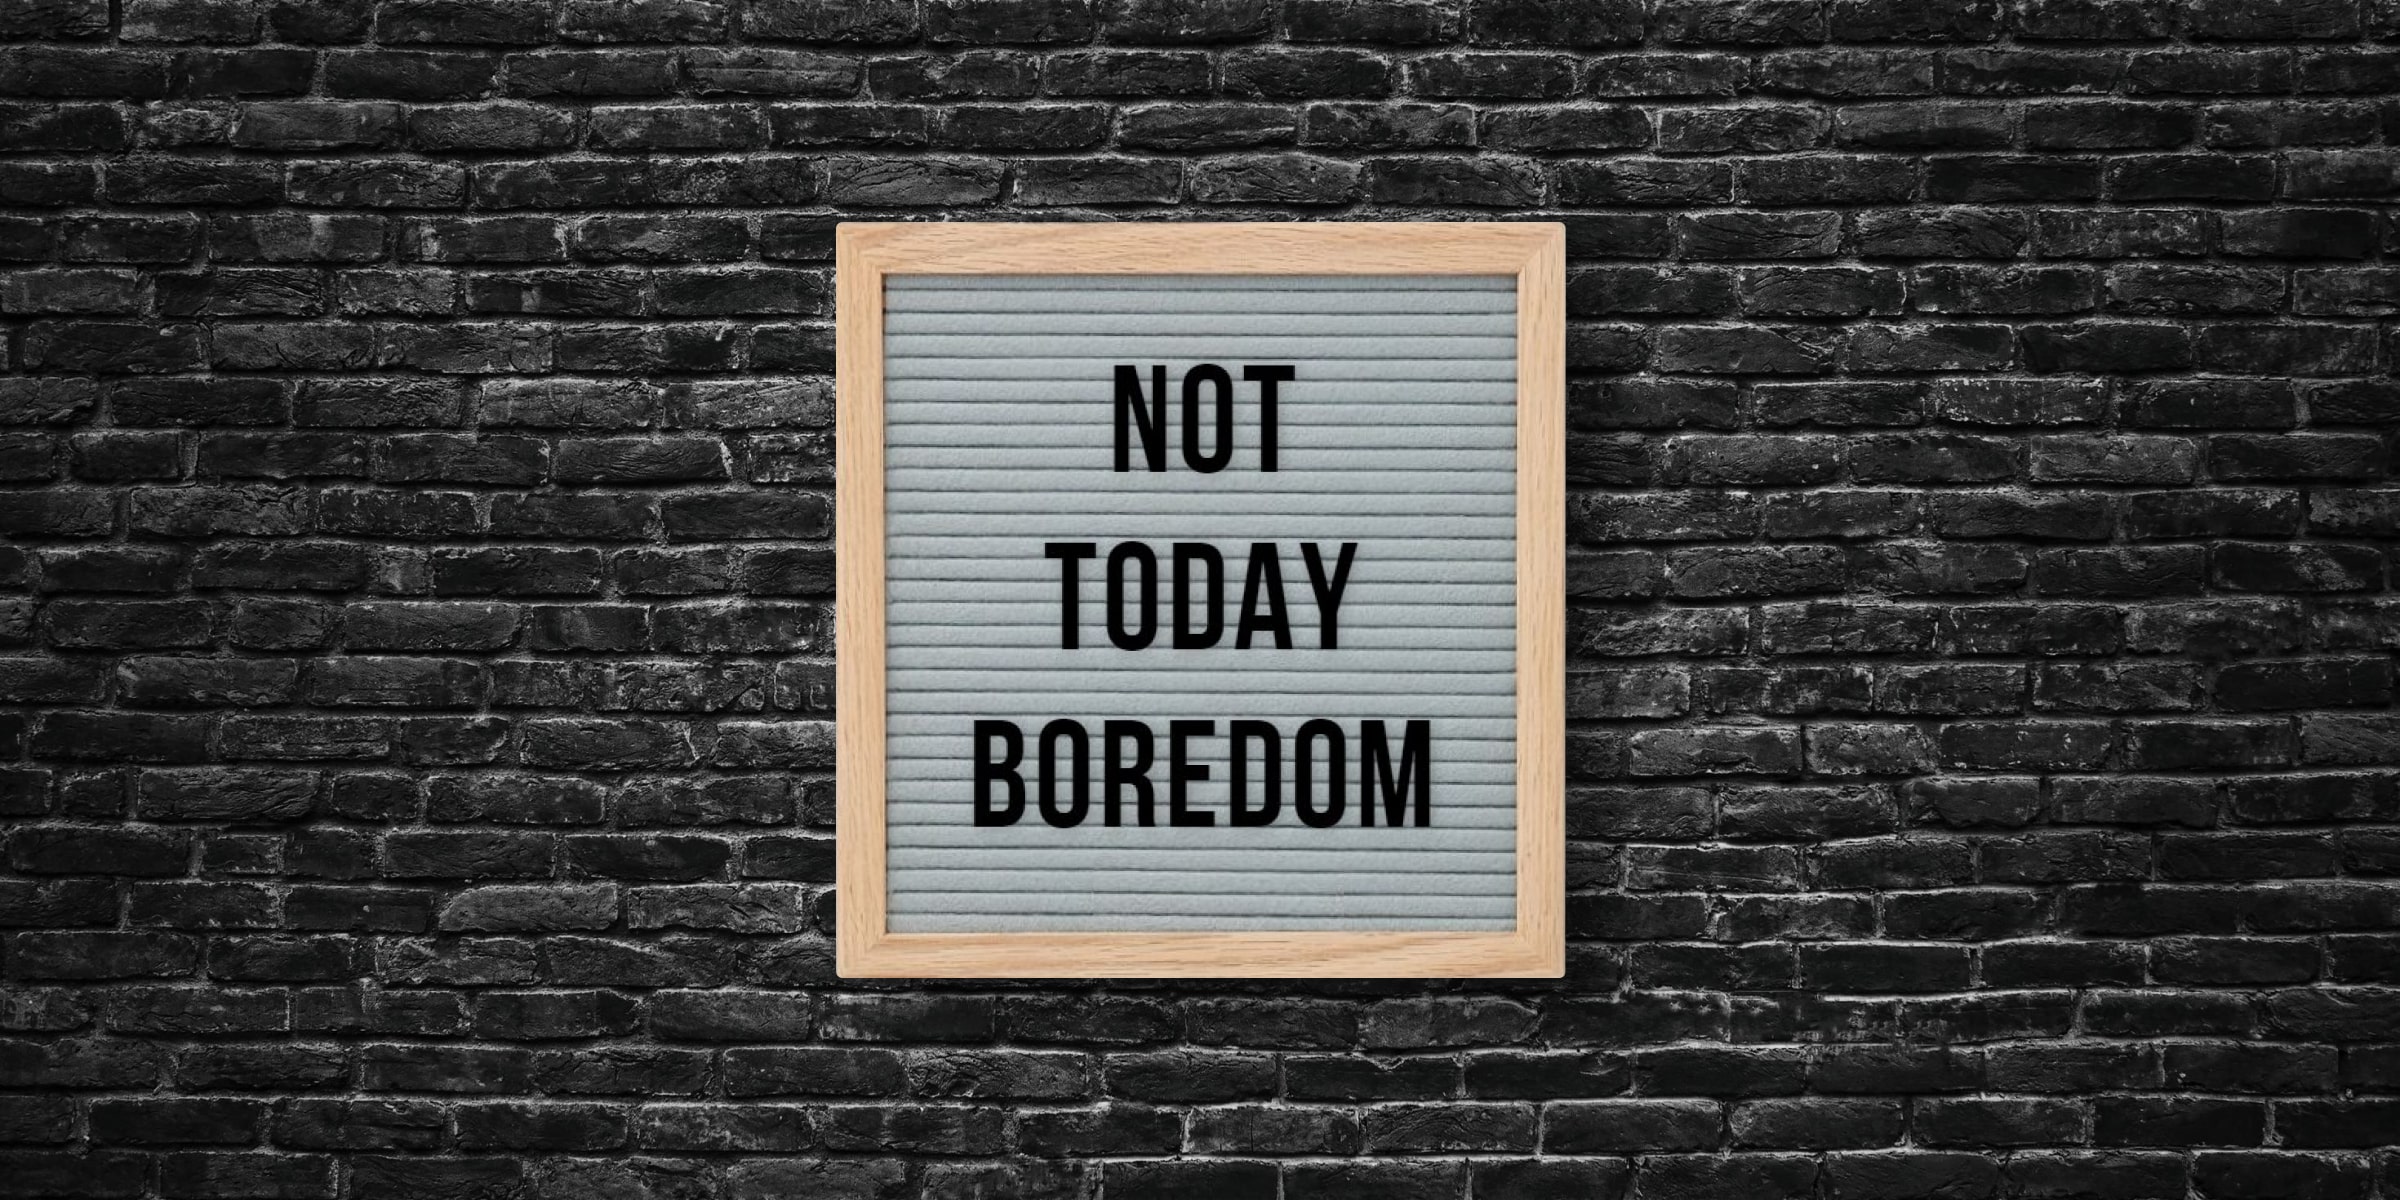 9 ways to reduce boredom intolerance (ADHD-tested!)